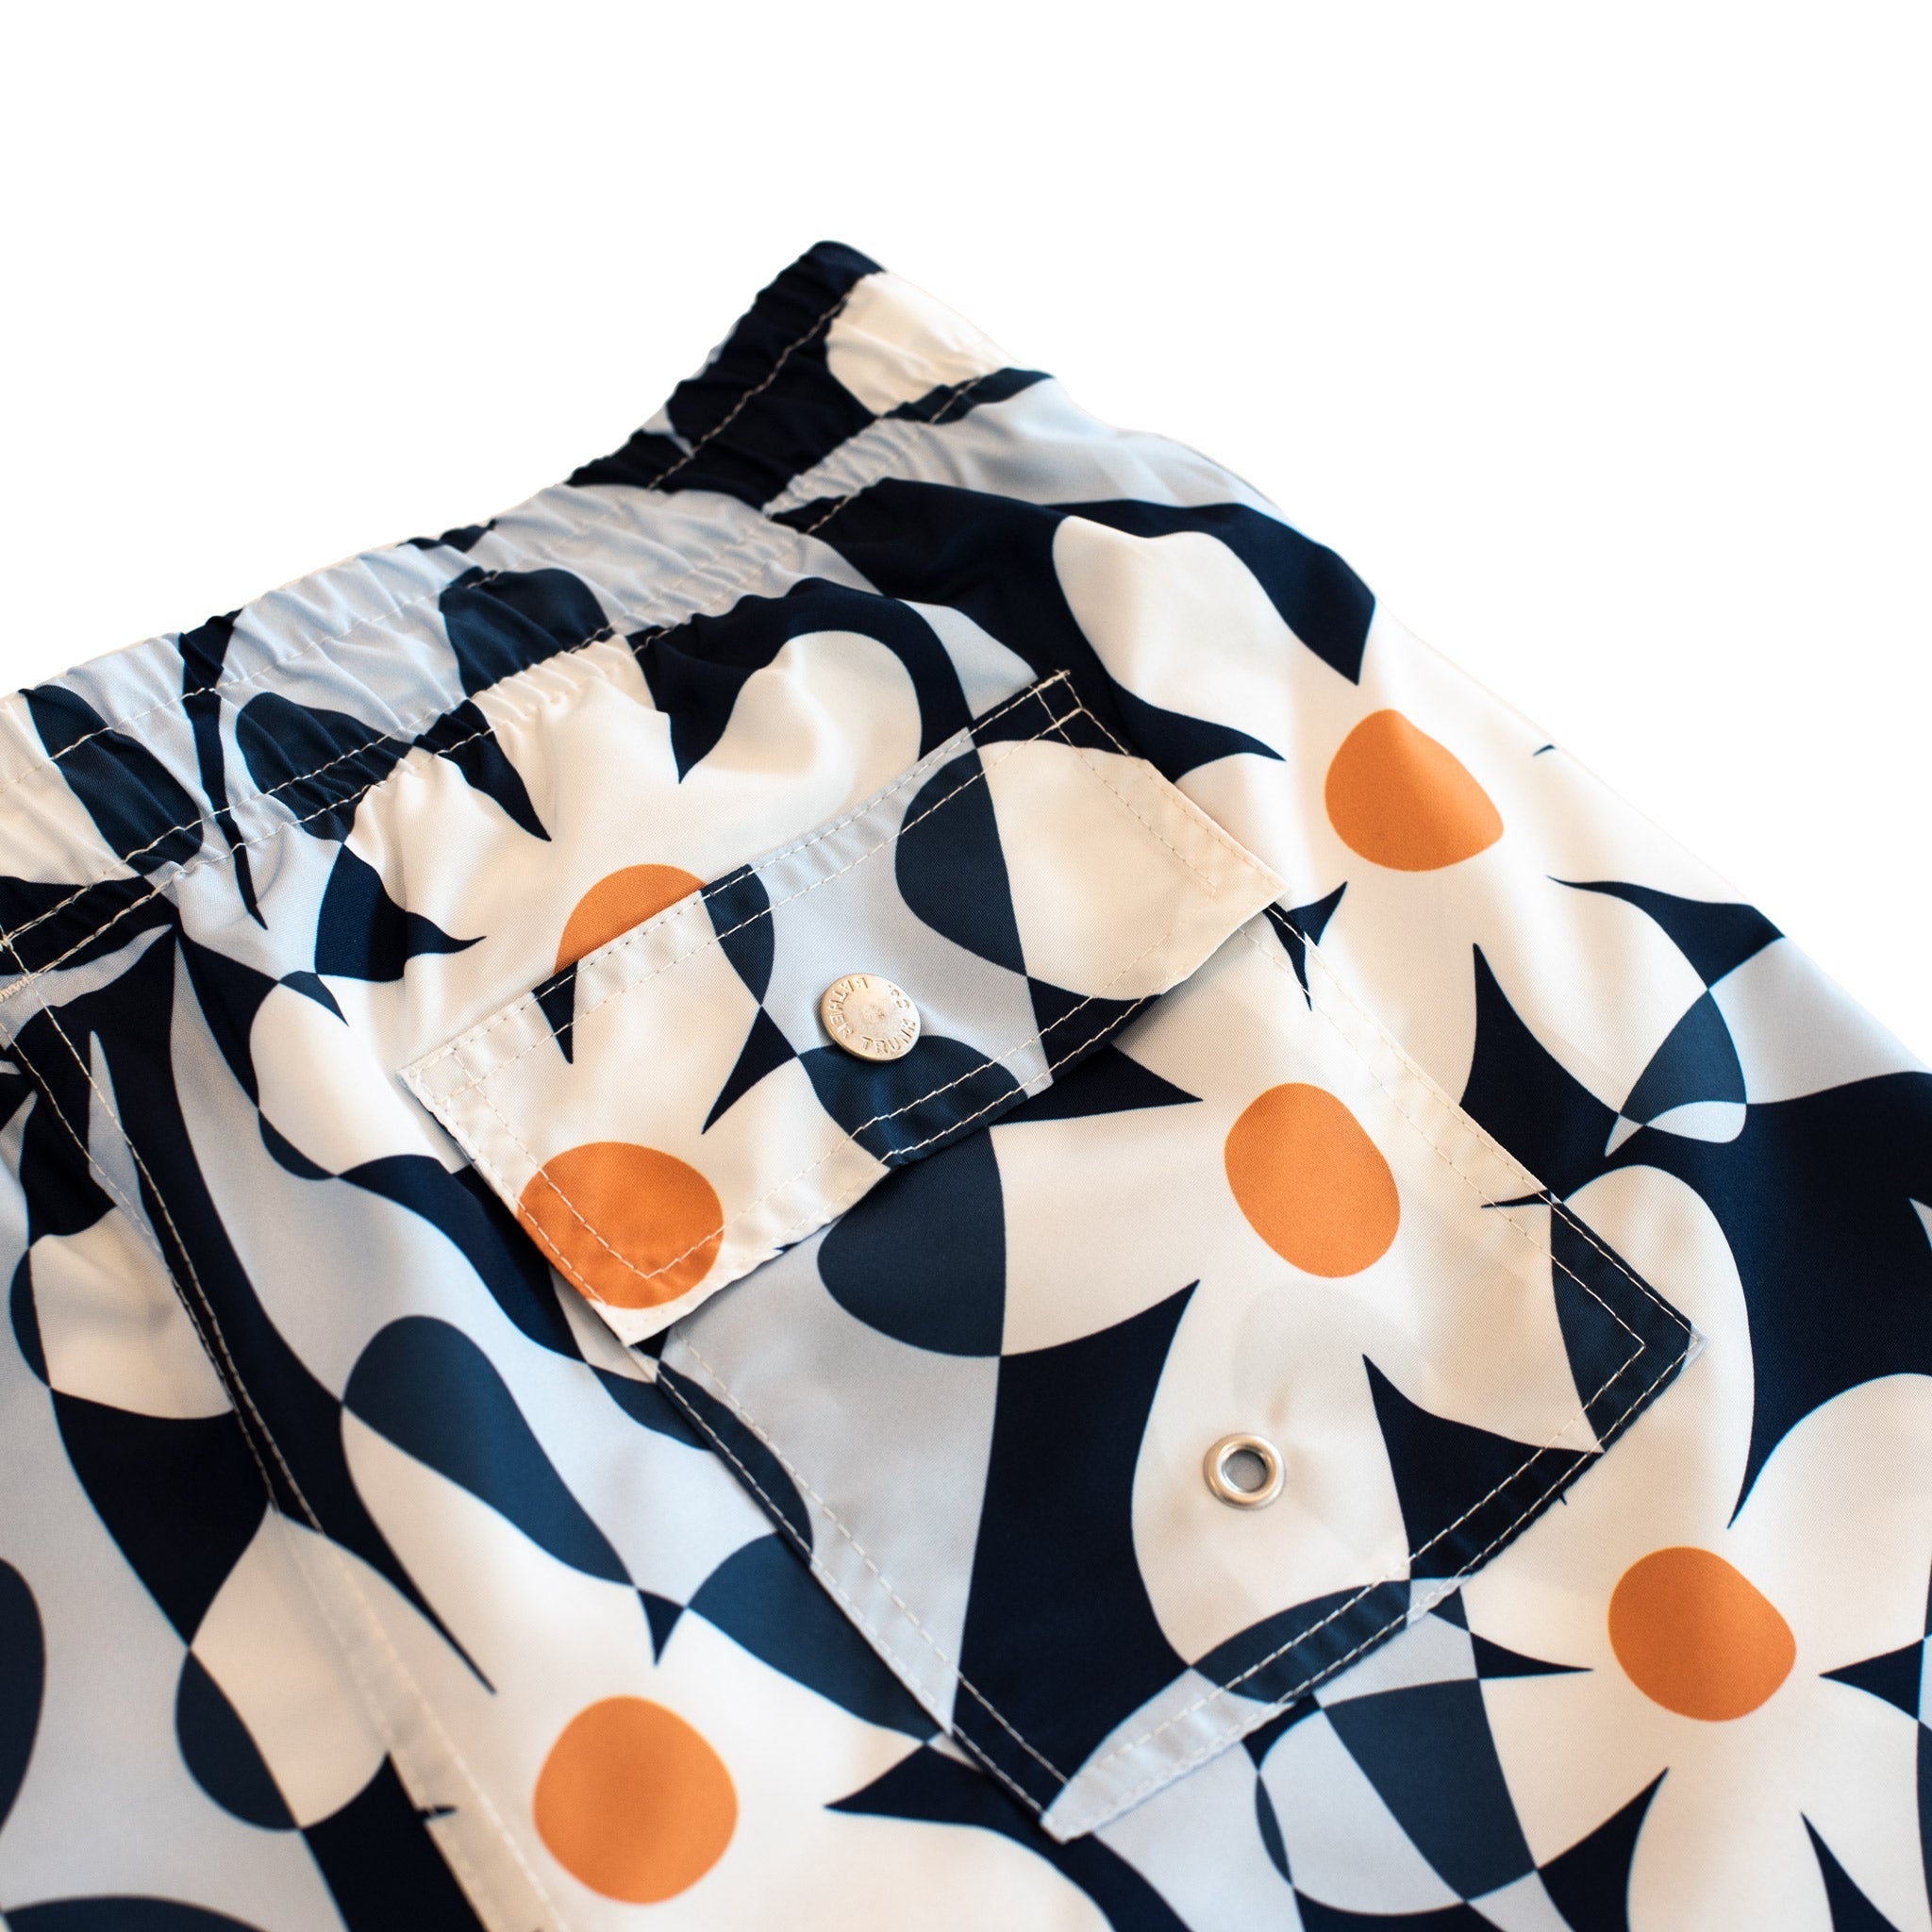 Detail view of blue Bather swim trunks with abstract daisy pattern